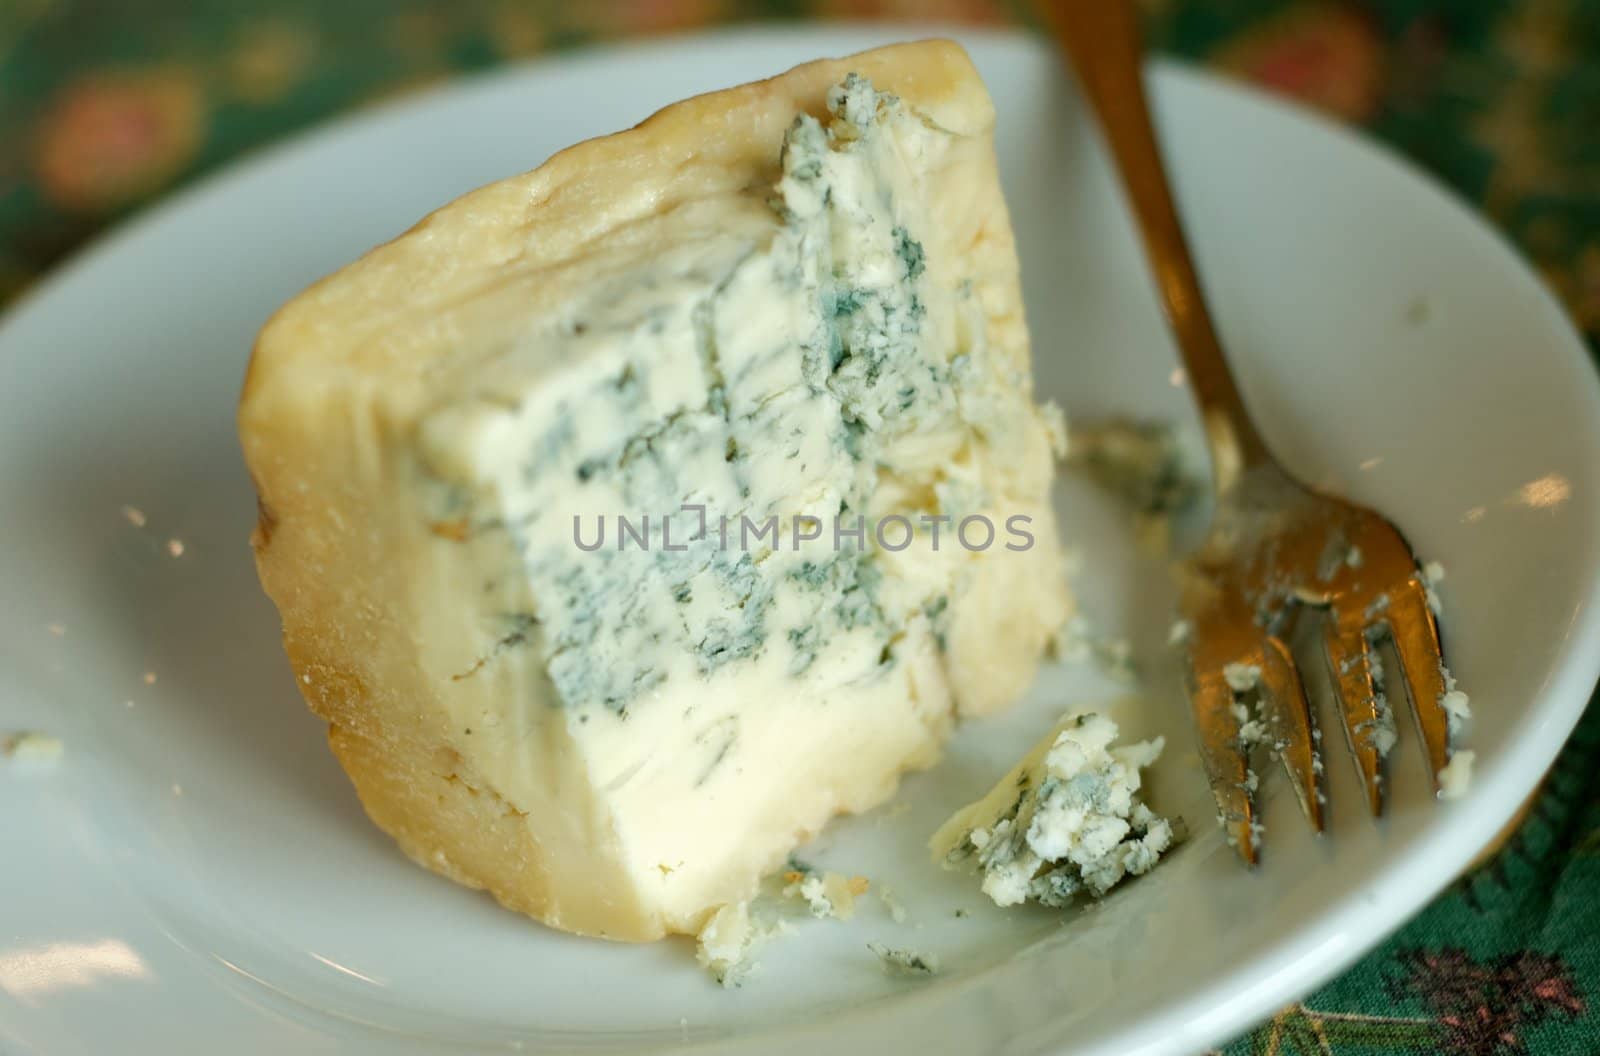 A tasty looking hunk of bleu cheese on a plate